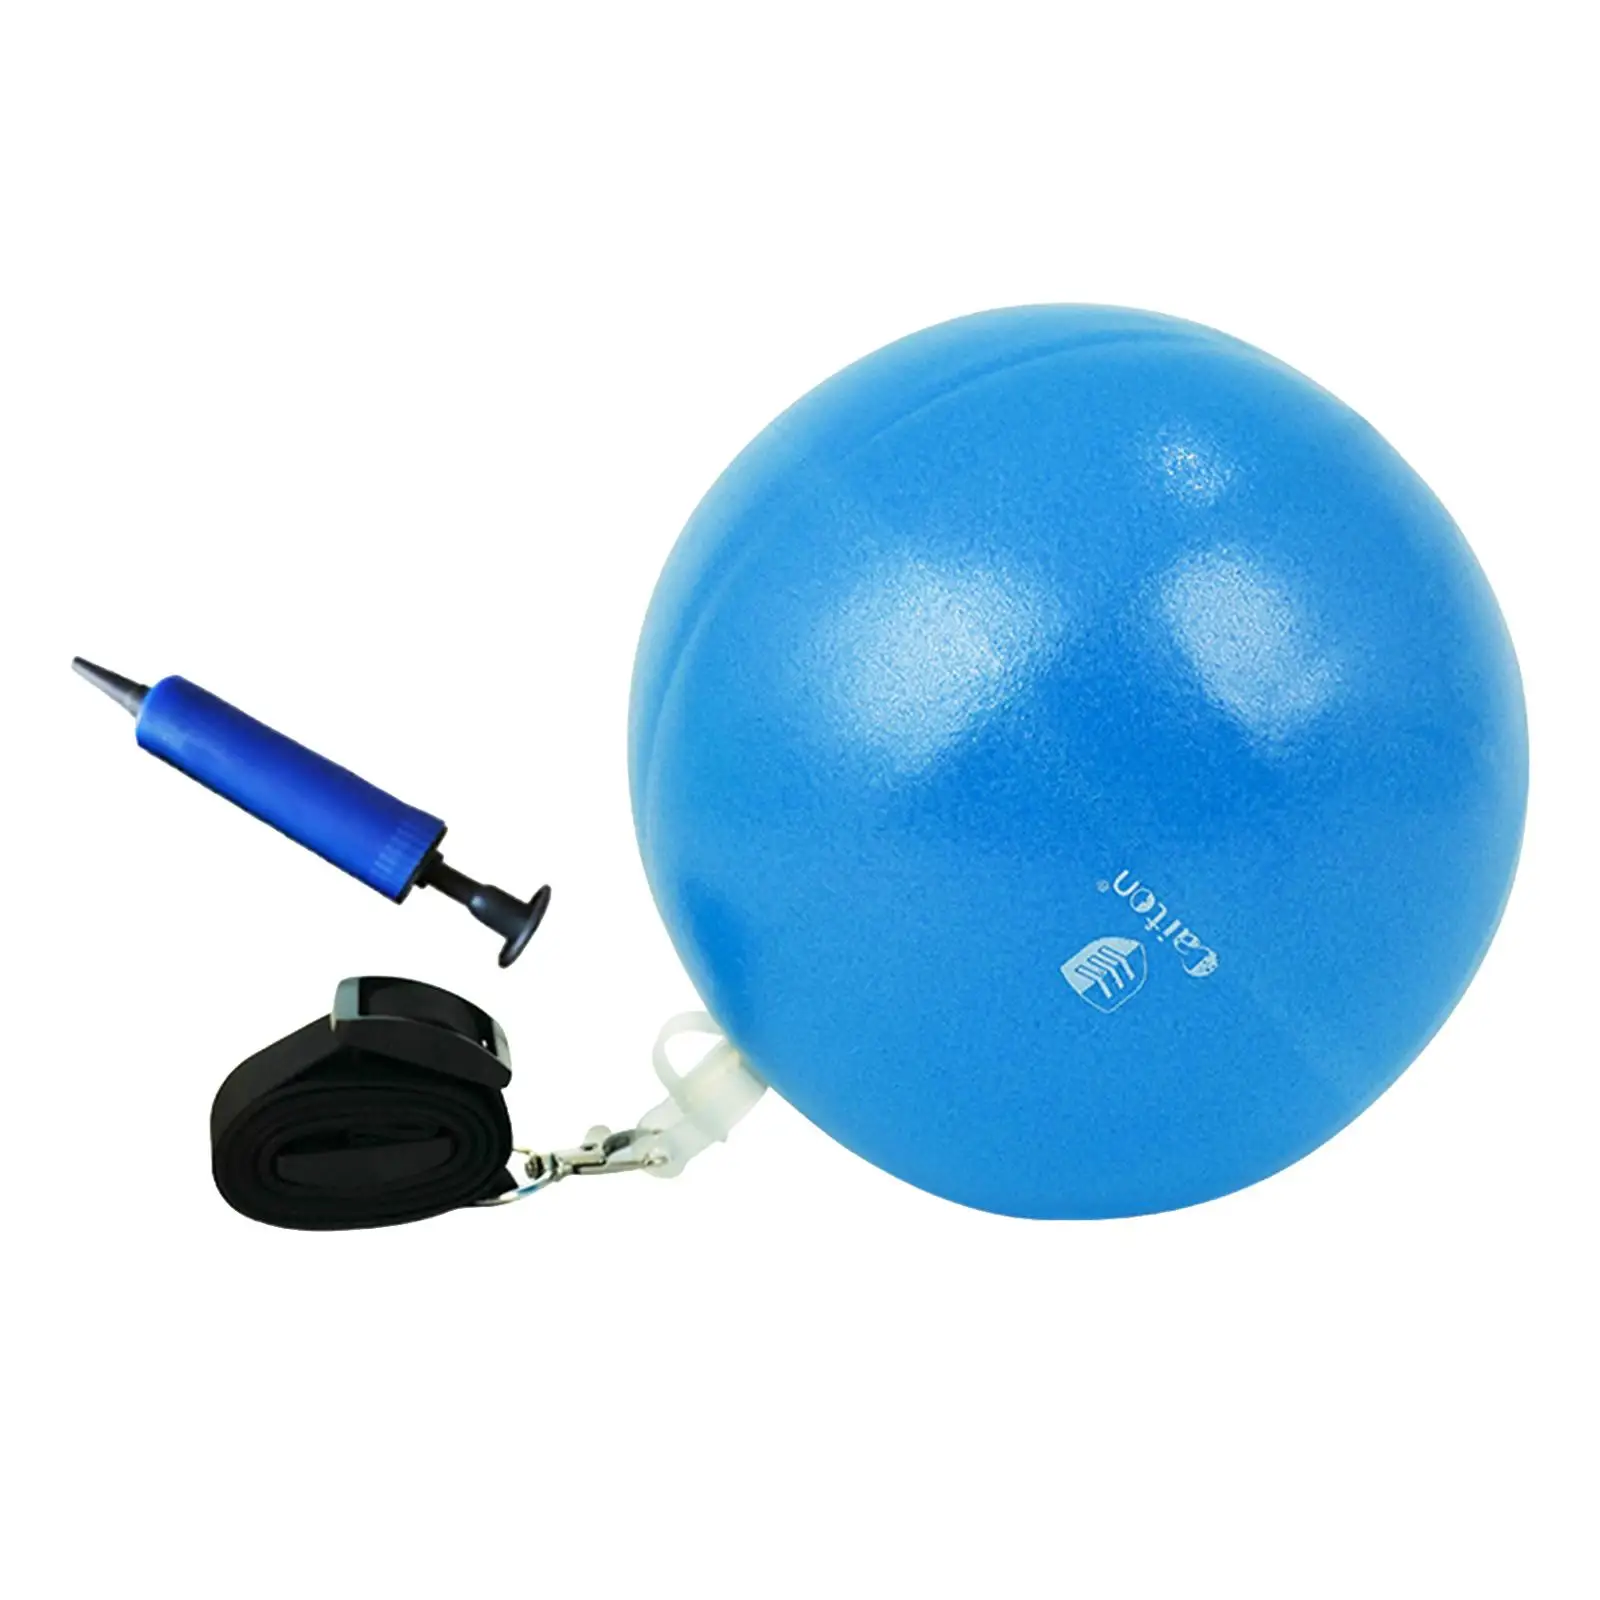 Golf Swing Trainer Ball Assist W/ Adjustable Lanyard Supplies Practice for Posture Correction Golfer Practing